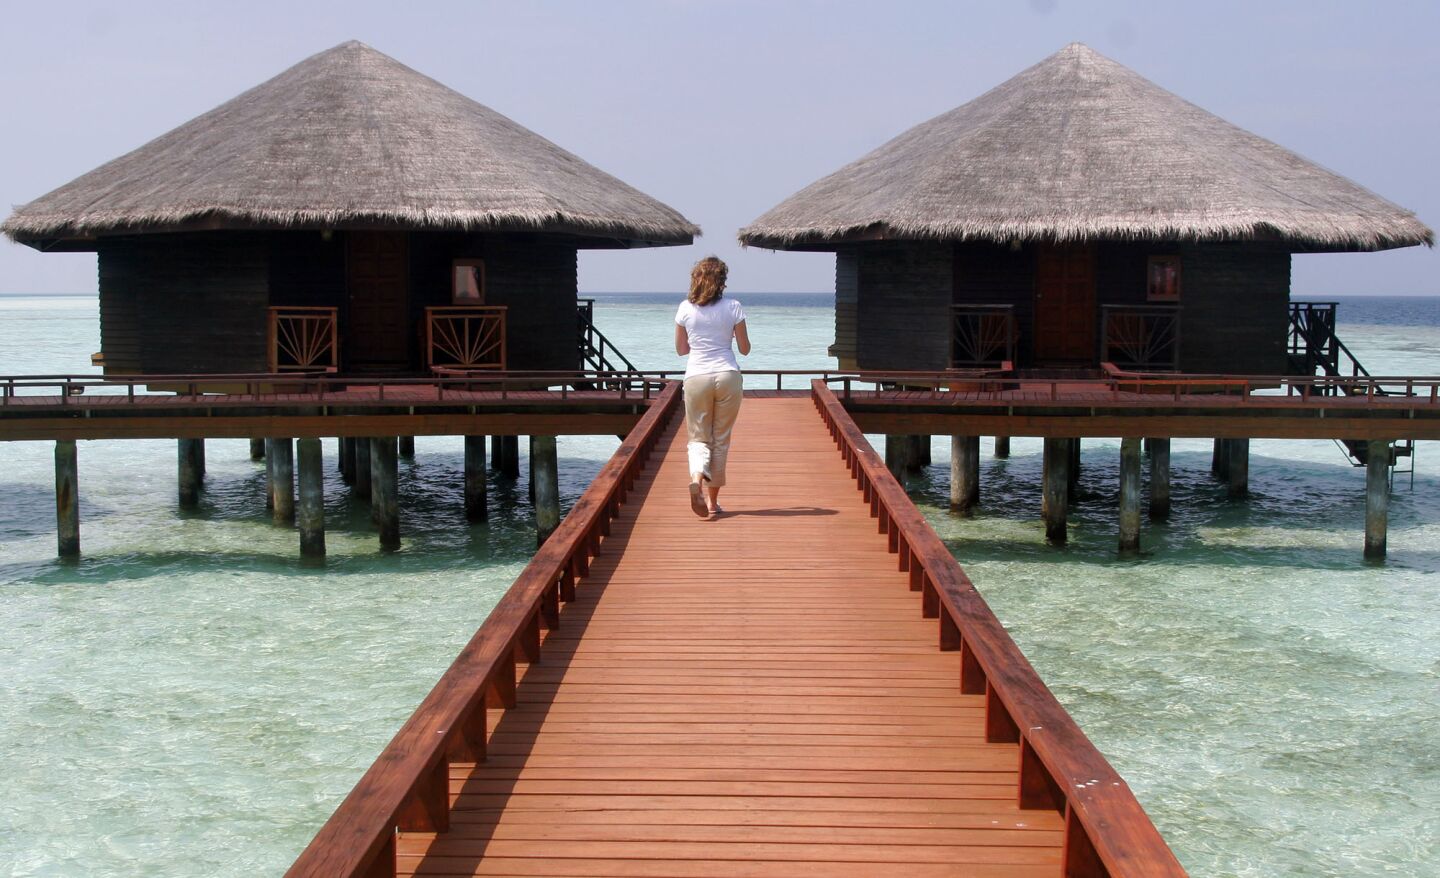 ** FILE ** A resort employee walks along the deserted walkway of the Baros Island resort, Jan. 15, 2005 in the Maldives. The Maldives economy, which depends in large part on tourism has taken a hit in the wake of the asian tsunami disaster, but many resort owners are hopeful that the industry will recover quickly as the resorts remained largely undamaged by the tsunami.(AP Photo/Ed Wray)